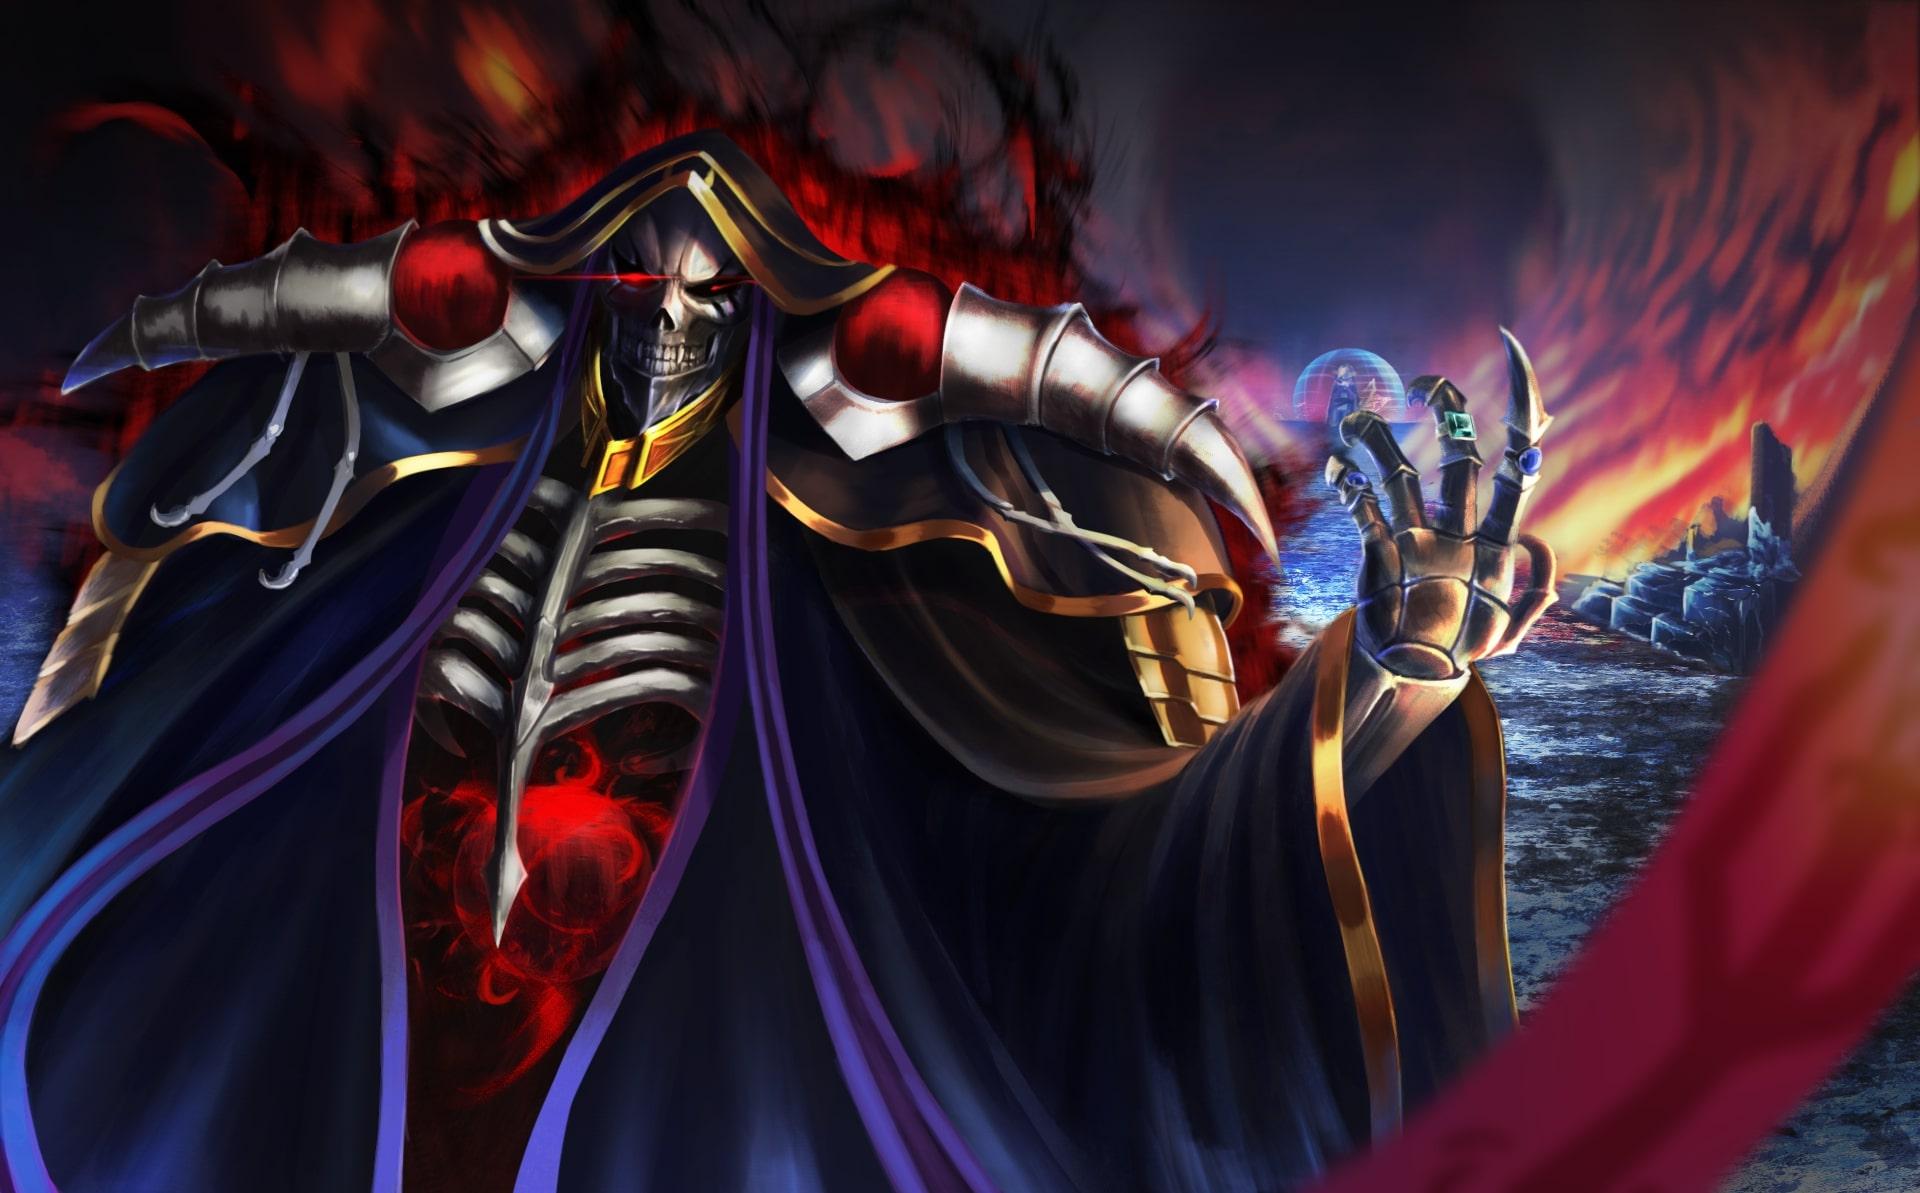 Wallpaper of Ainz Ooal Gown, Anime, Overlord background & HD